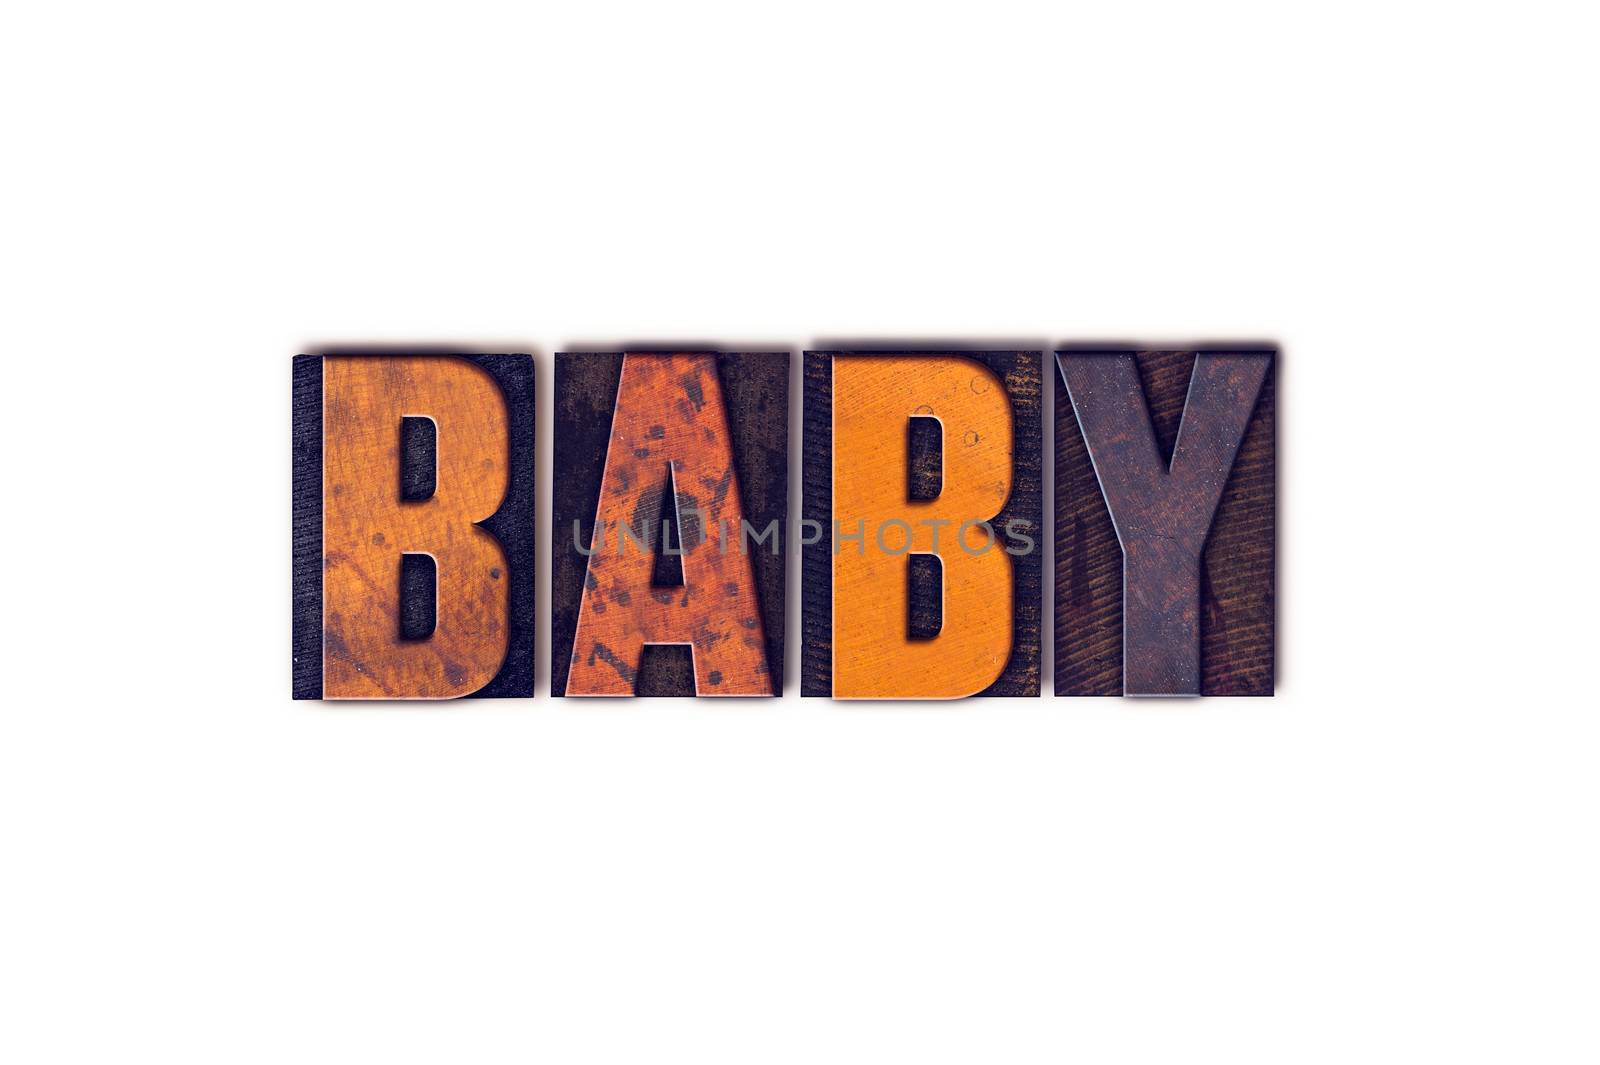 The word "Baby" written in isolated vintage wooden letterpress type on a white background.